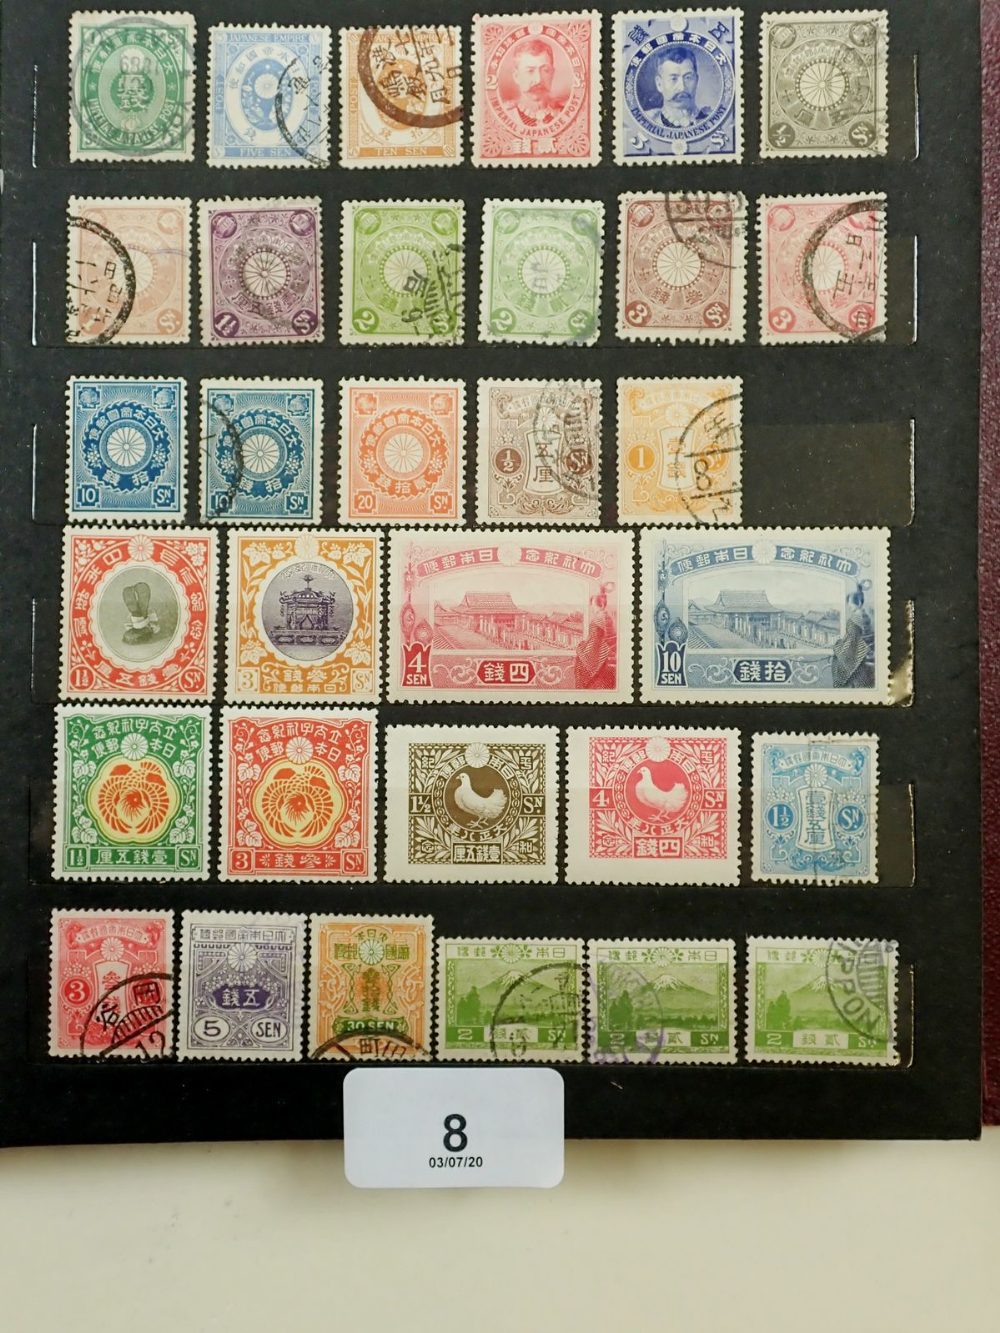 Stamps of Japan and South Korea along with others such as Italy in 2 stock-books, 2 presentation